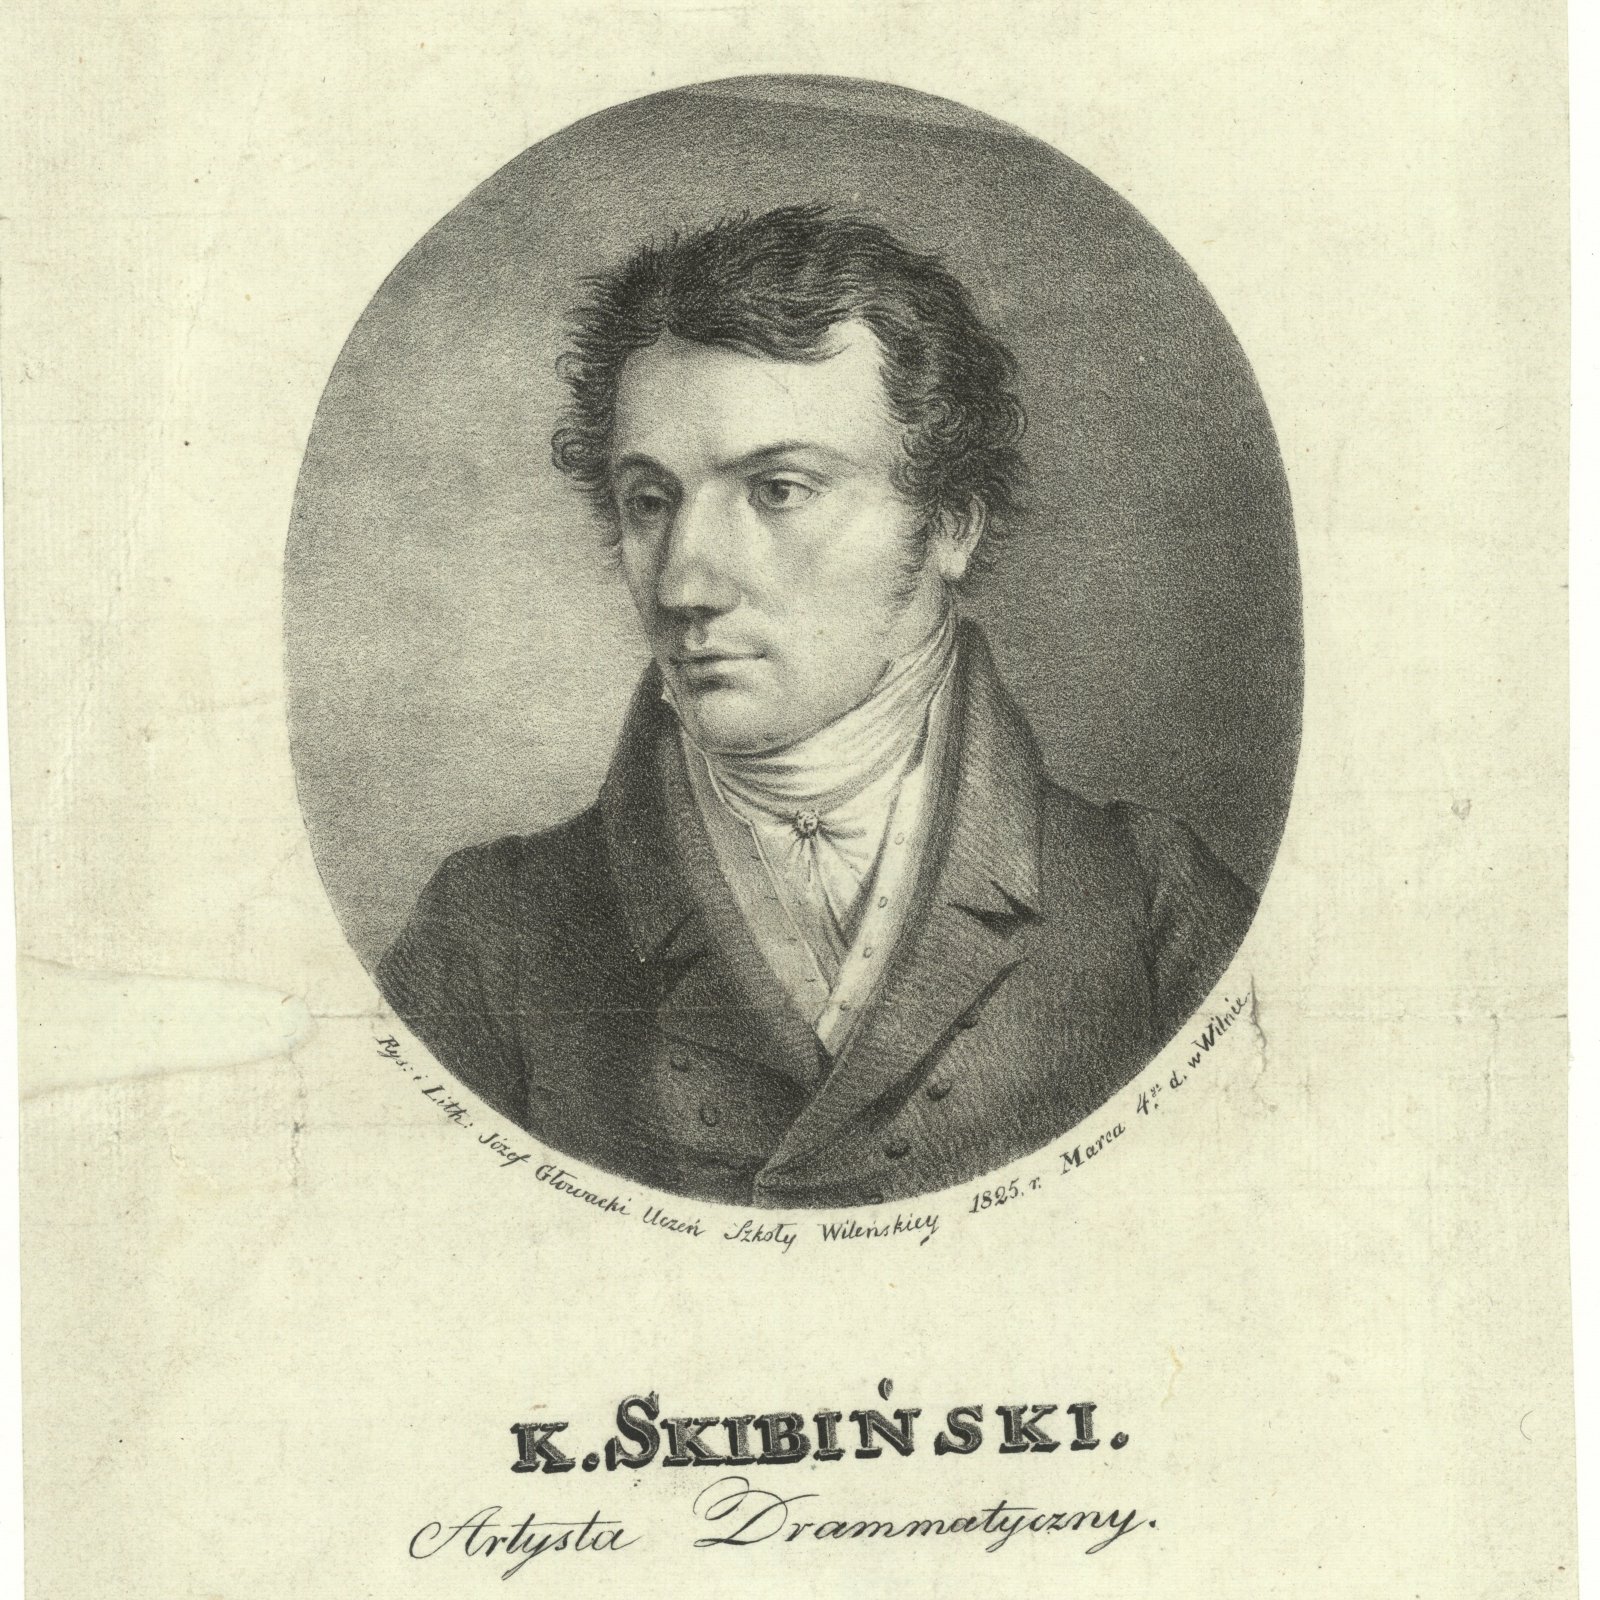 Kazimierz Skibiński, the Lublin director of The Marksman, 1838, lithograph from the collection of the National Library of Poland. 